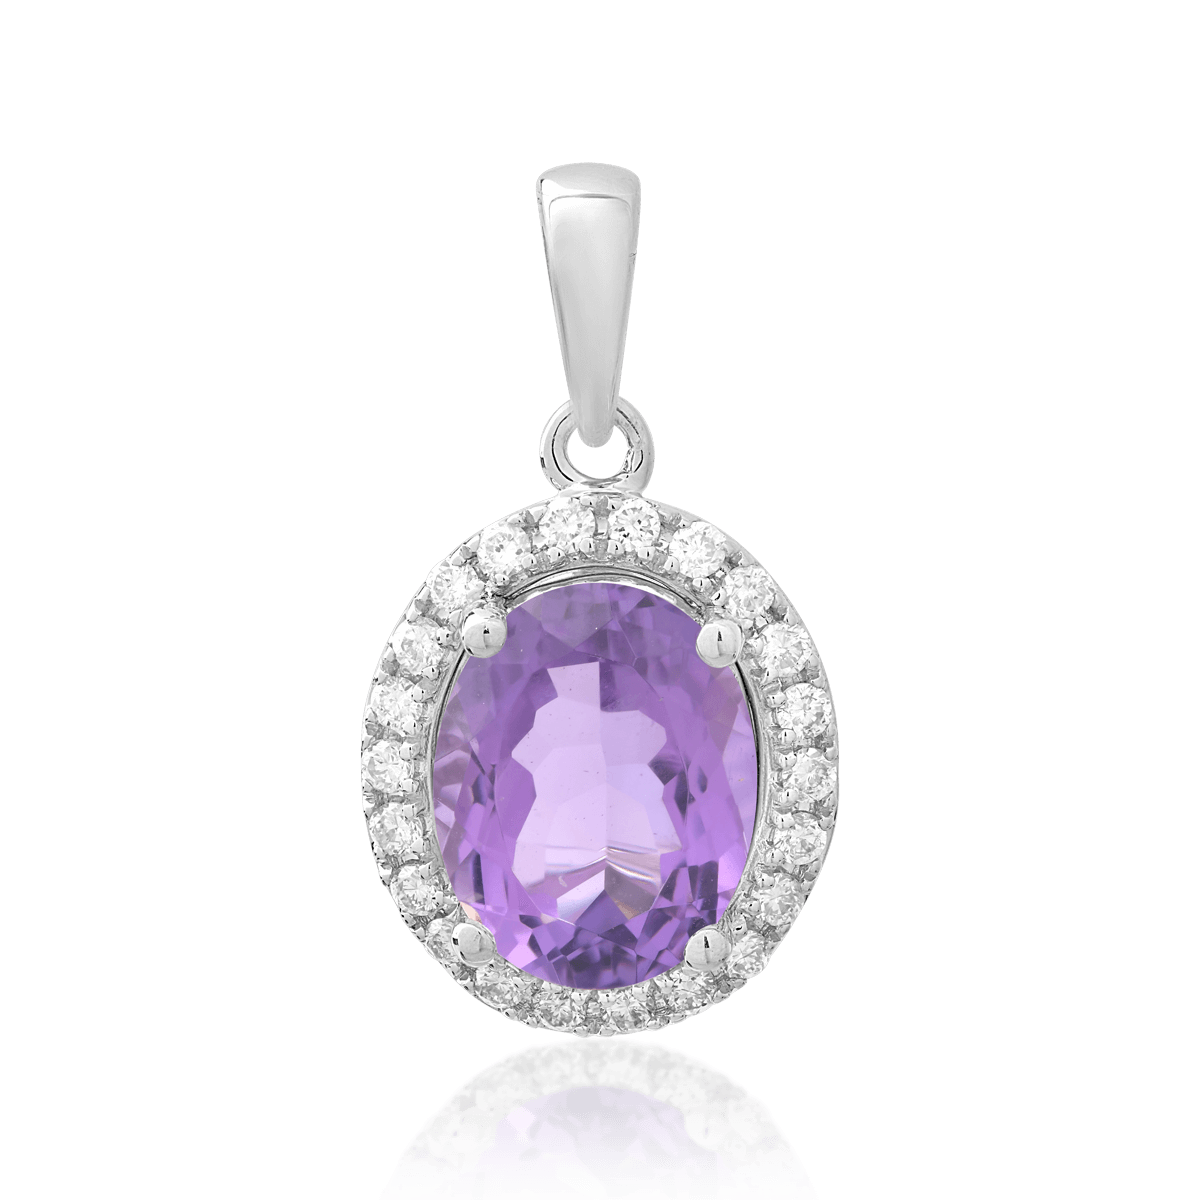 18K white gold pendant with amethyst of 1.82ct and diamonds of 0.17ct